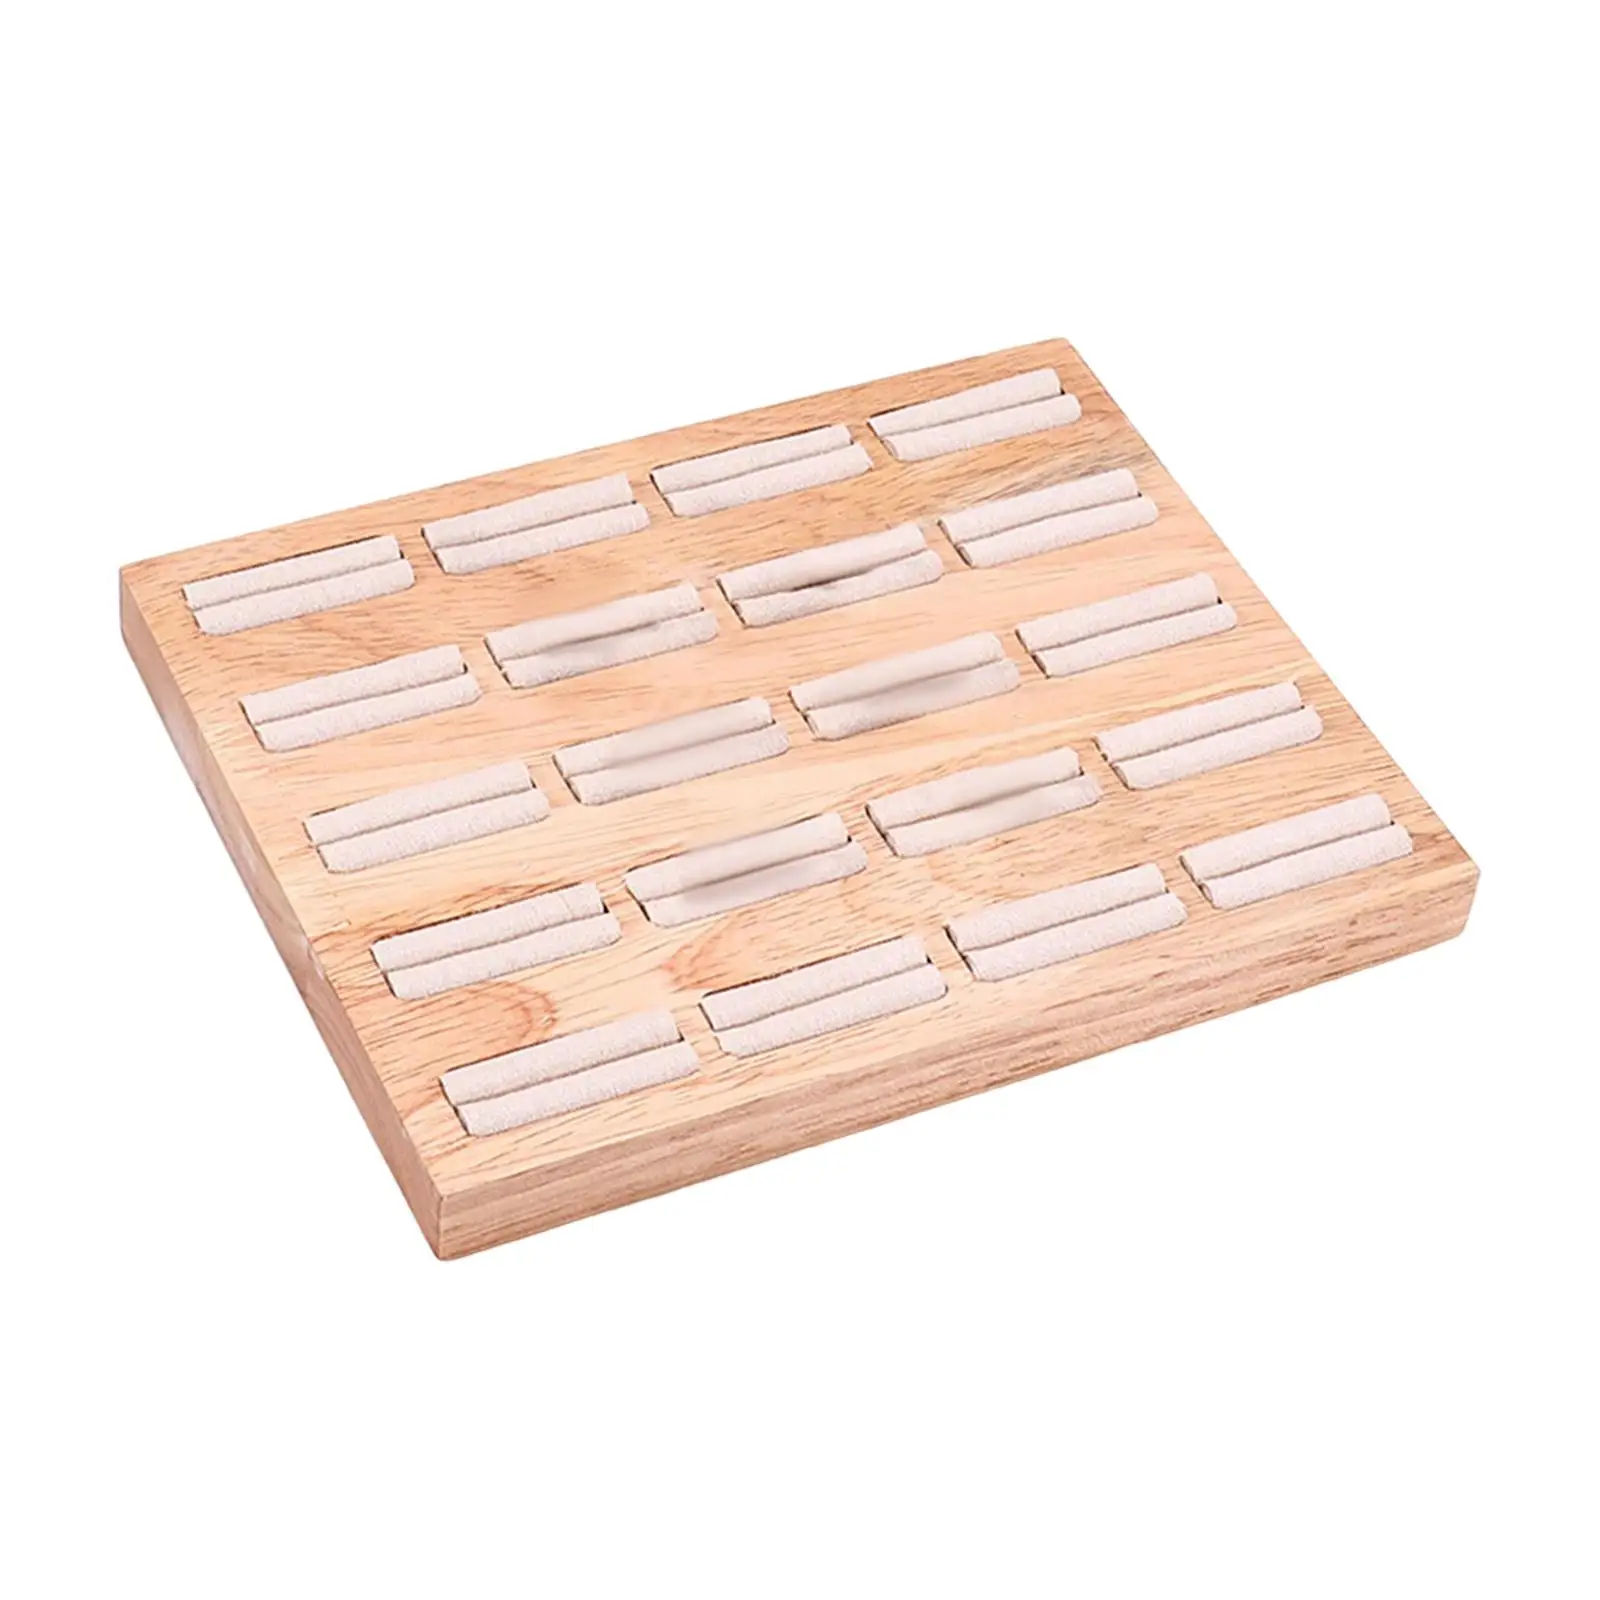 Multifunctional Display Tray Jewelry Holder for Vanity Countertop